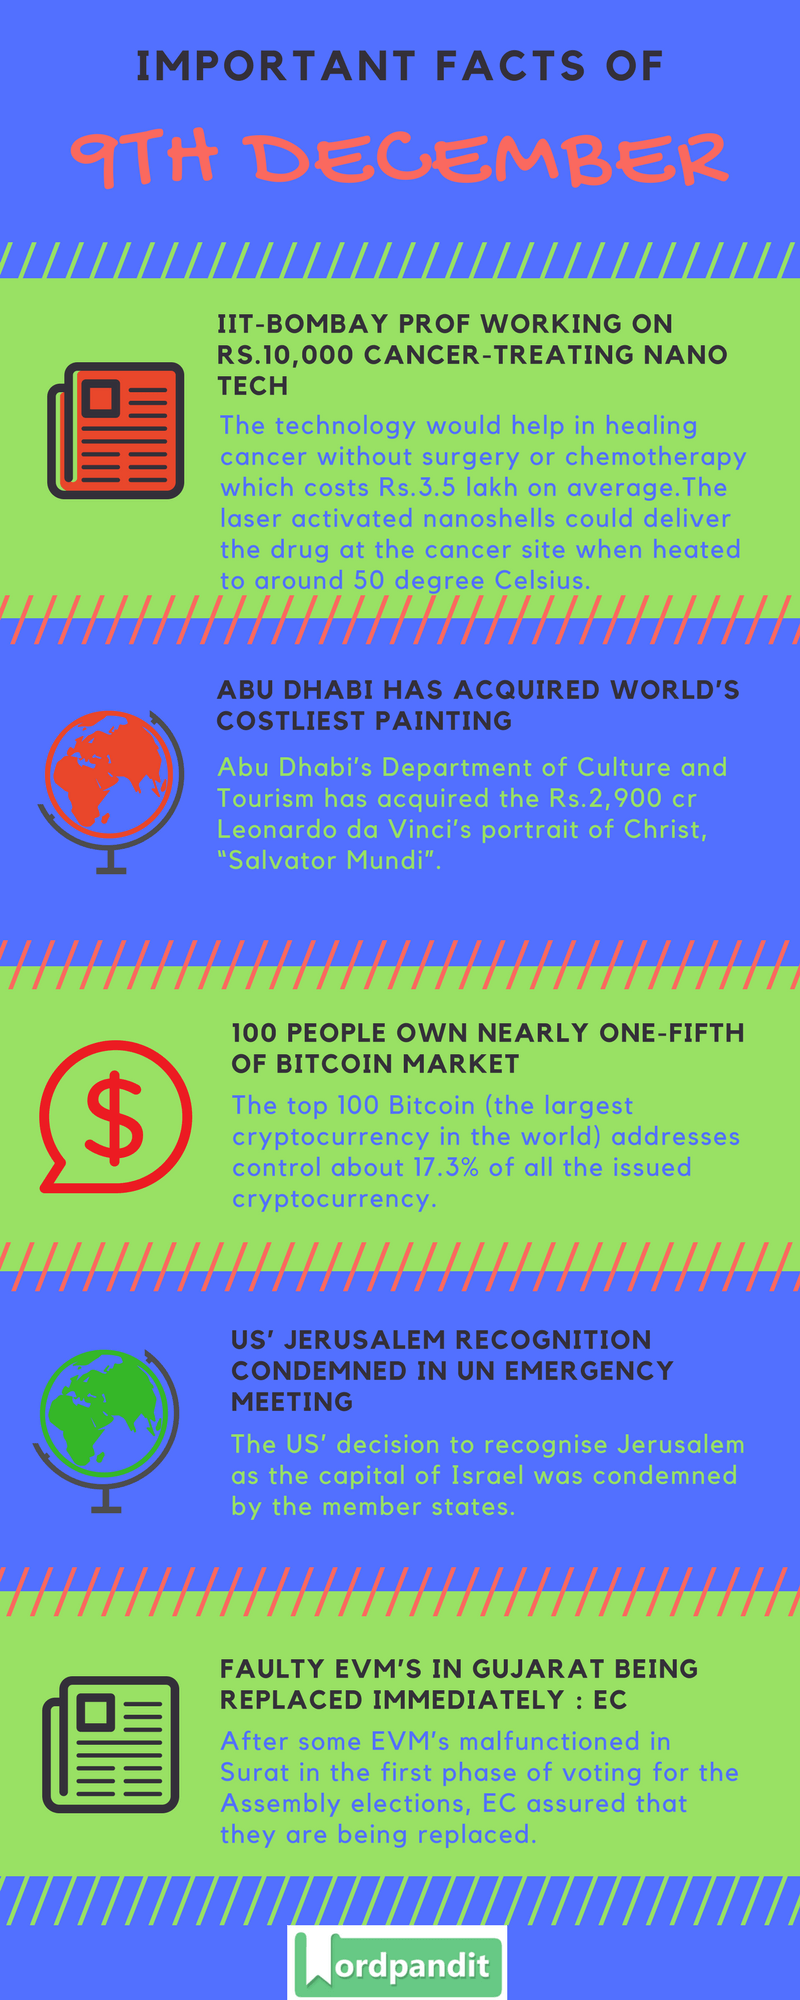 Daily-Current-Affairs-9-december-2017-Current-Affairs-Quiz-december-9-2017-Current-Affairs-Infographic